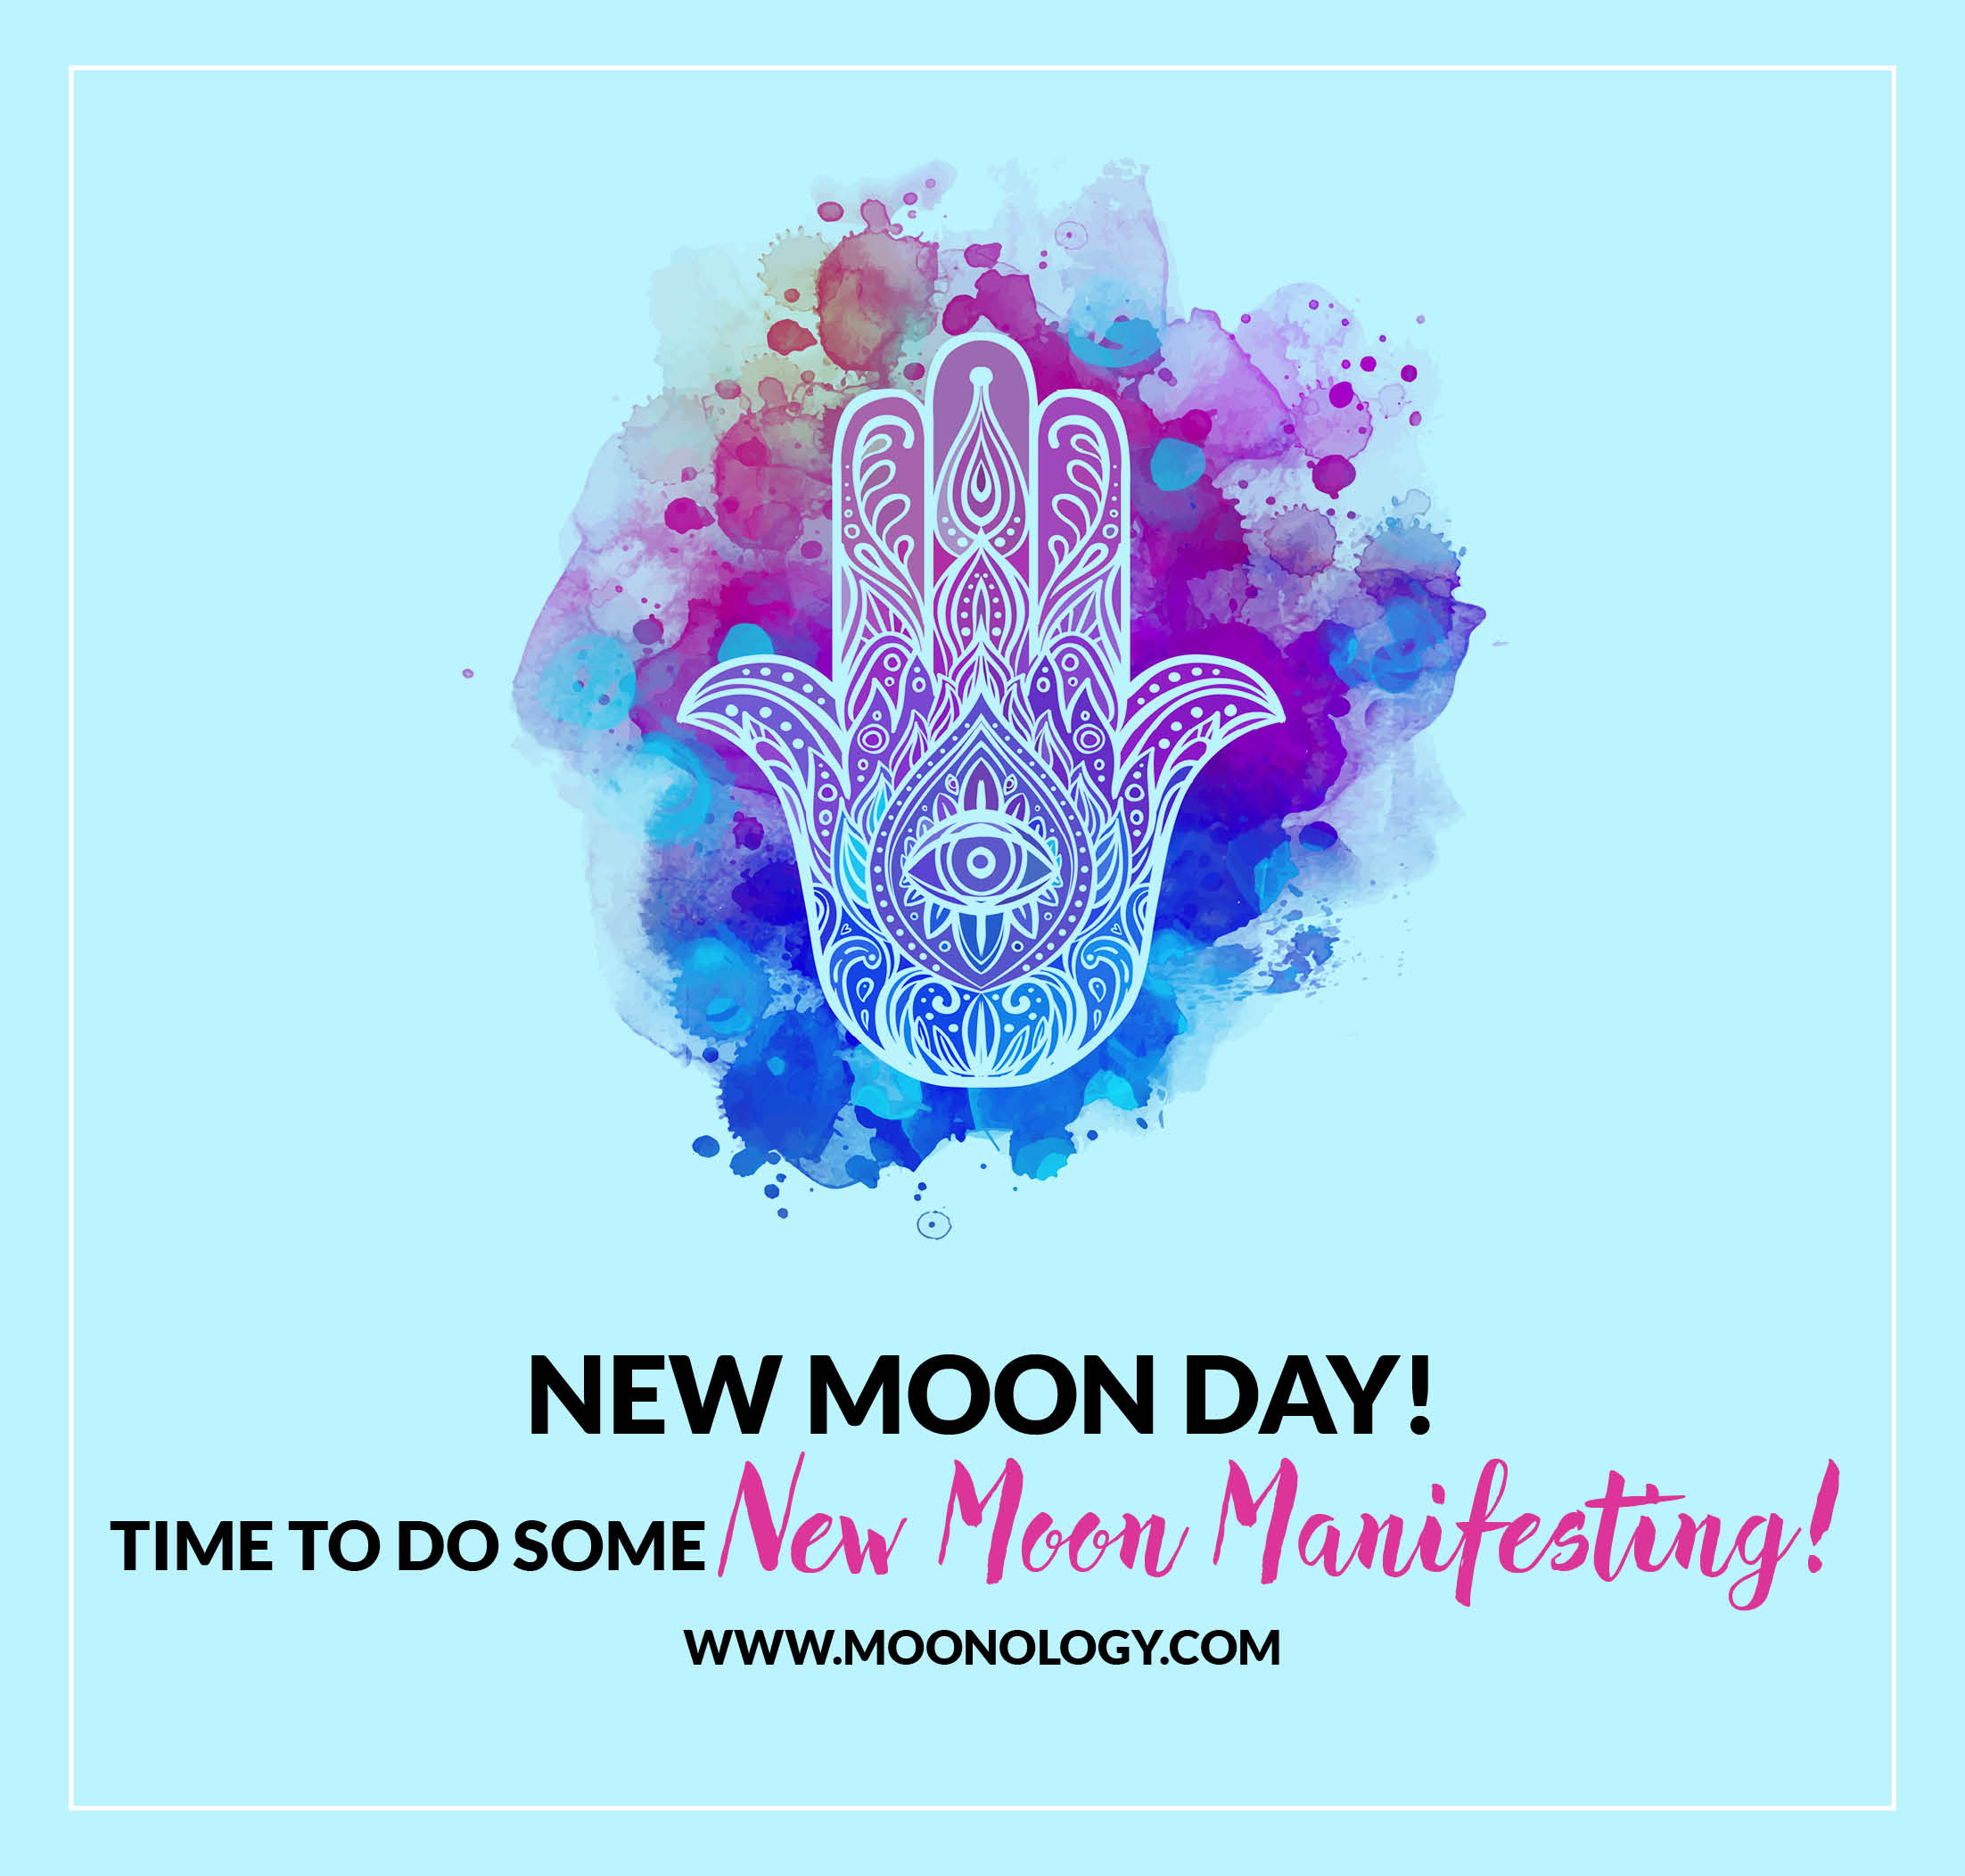 The New Moon takes place today!